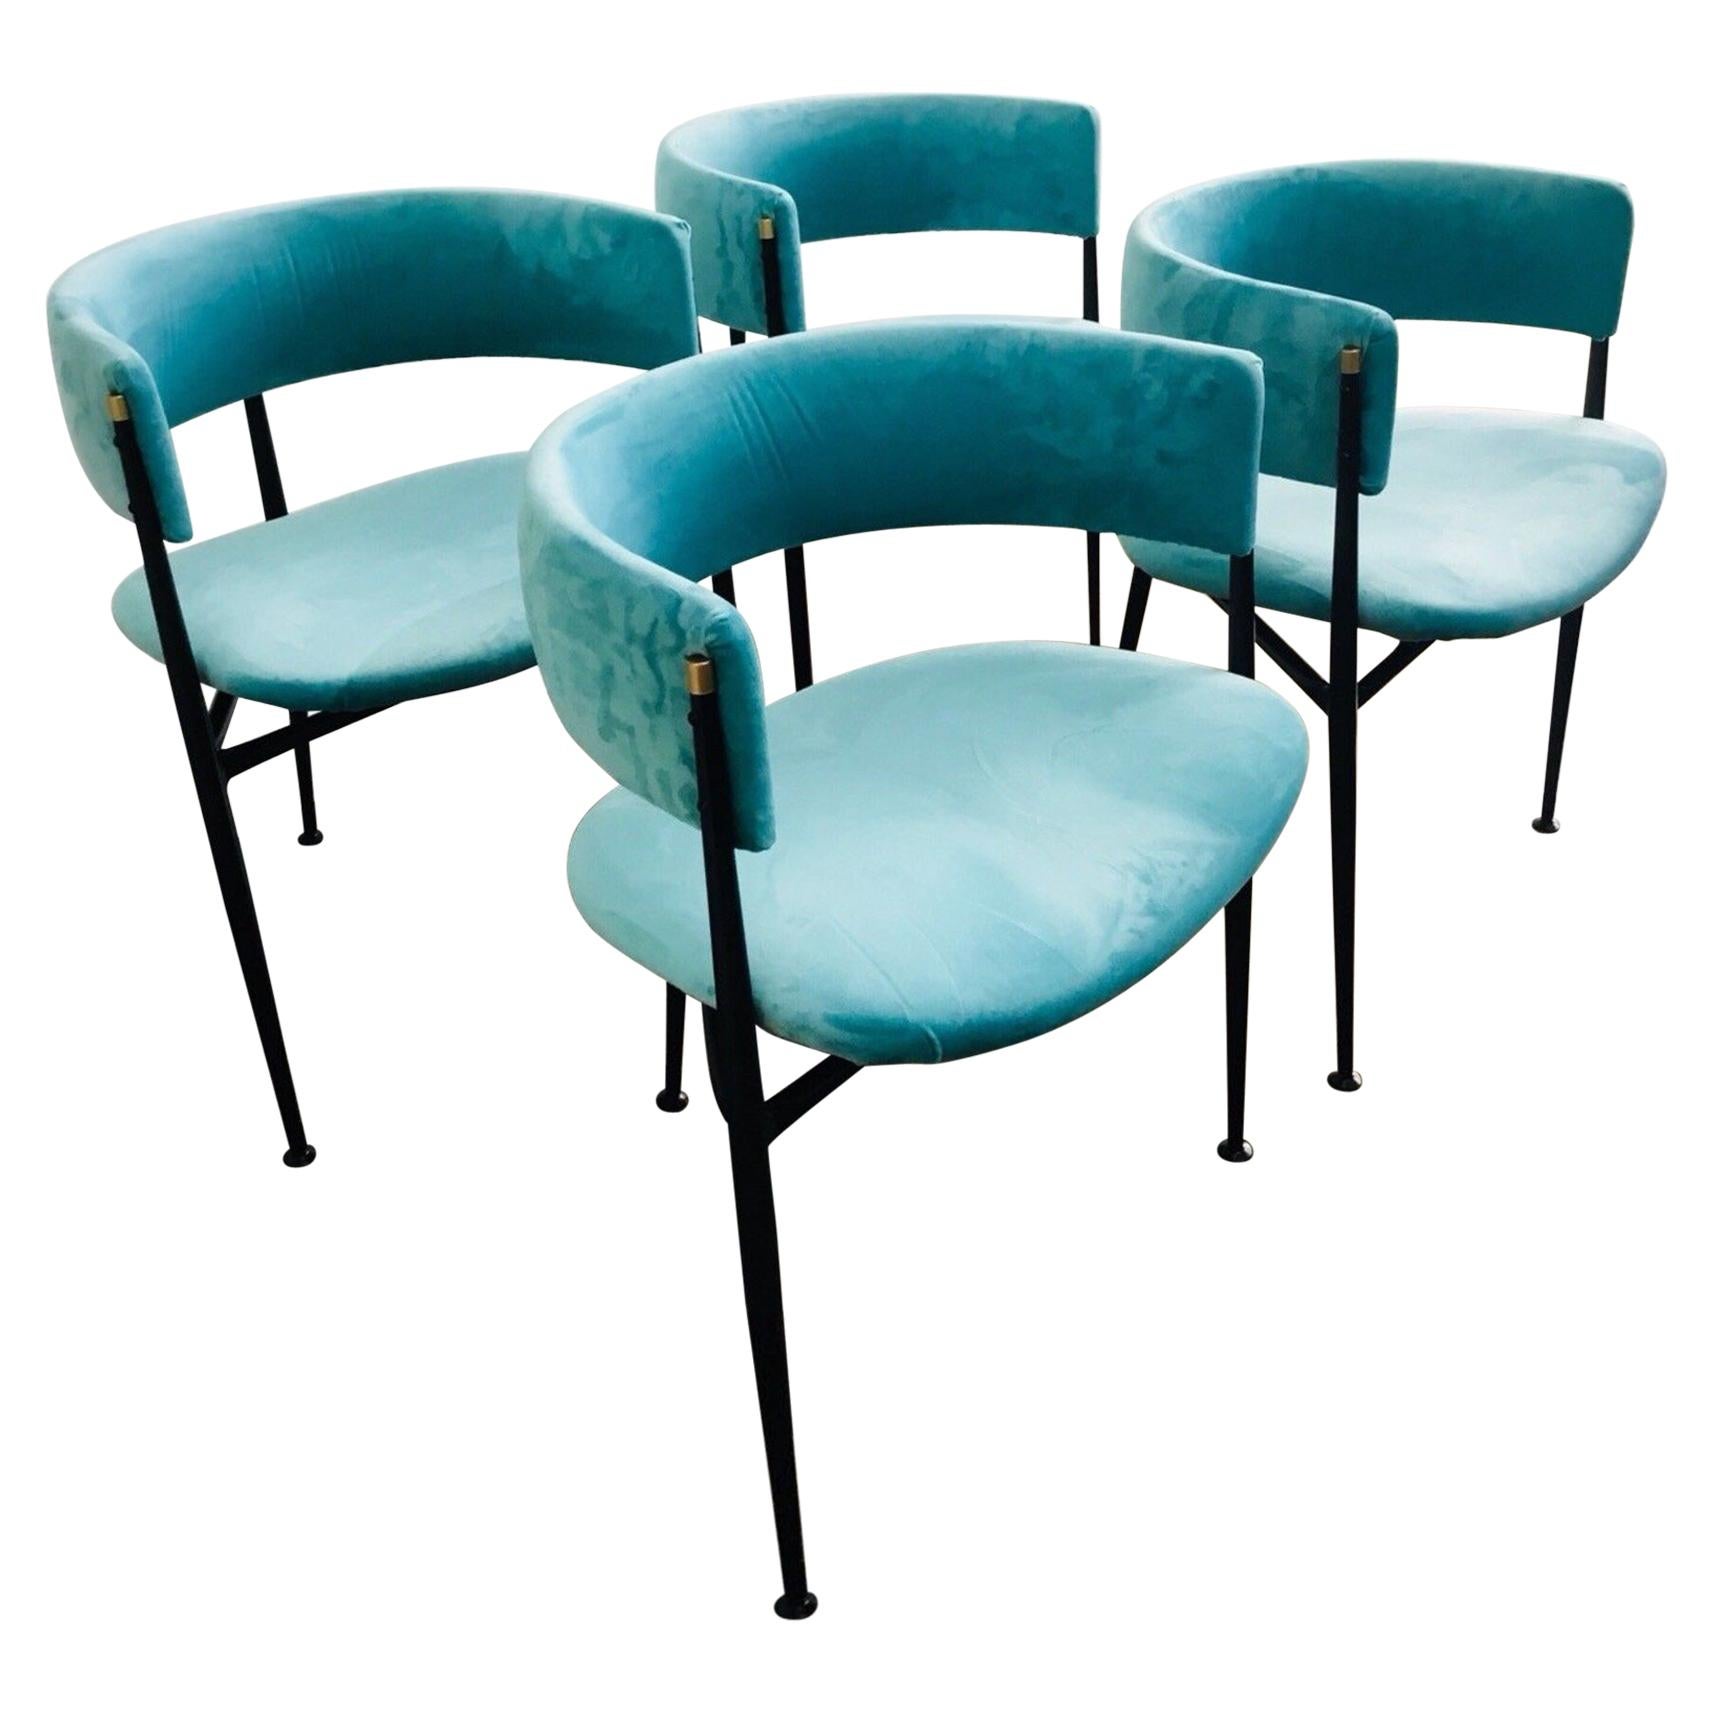 Midcentury 1950s Australian Atomic Age Set of Four Dining Chairs For Sale